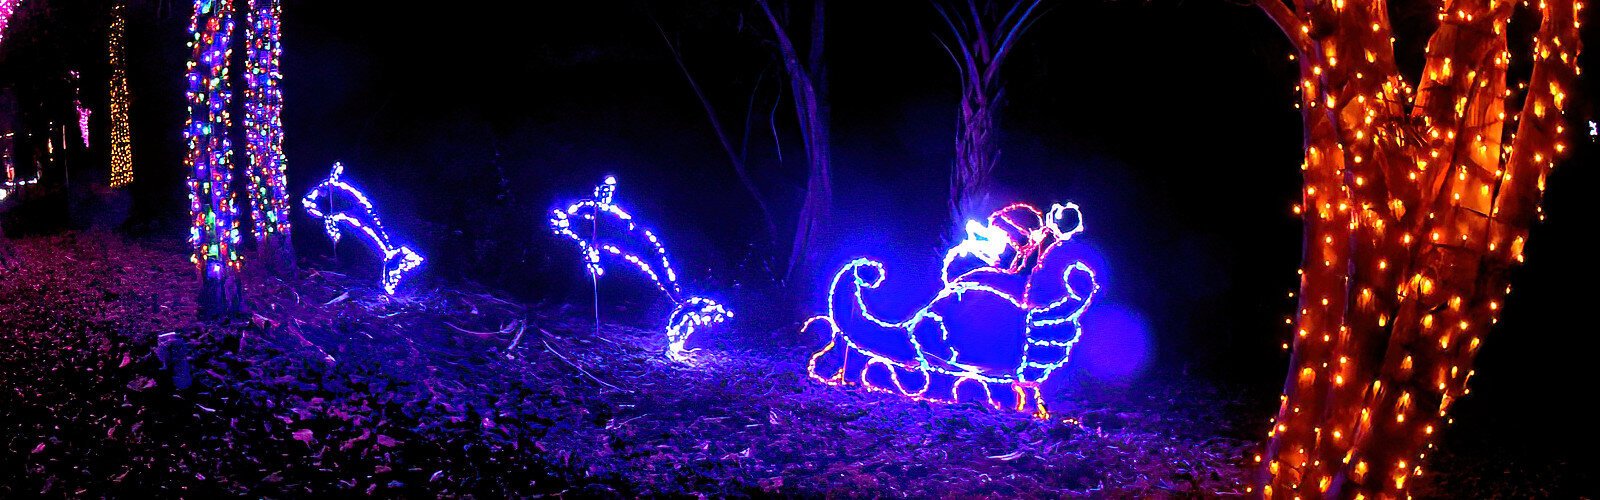 No reindeer for Santa at the Florida Botanical Gardens’ Holiday Lights in the Gardens, but playful dolphins are ready to take him through a sea of colorful lighting.